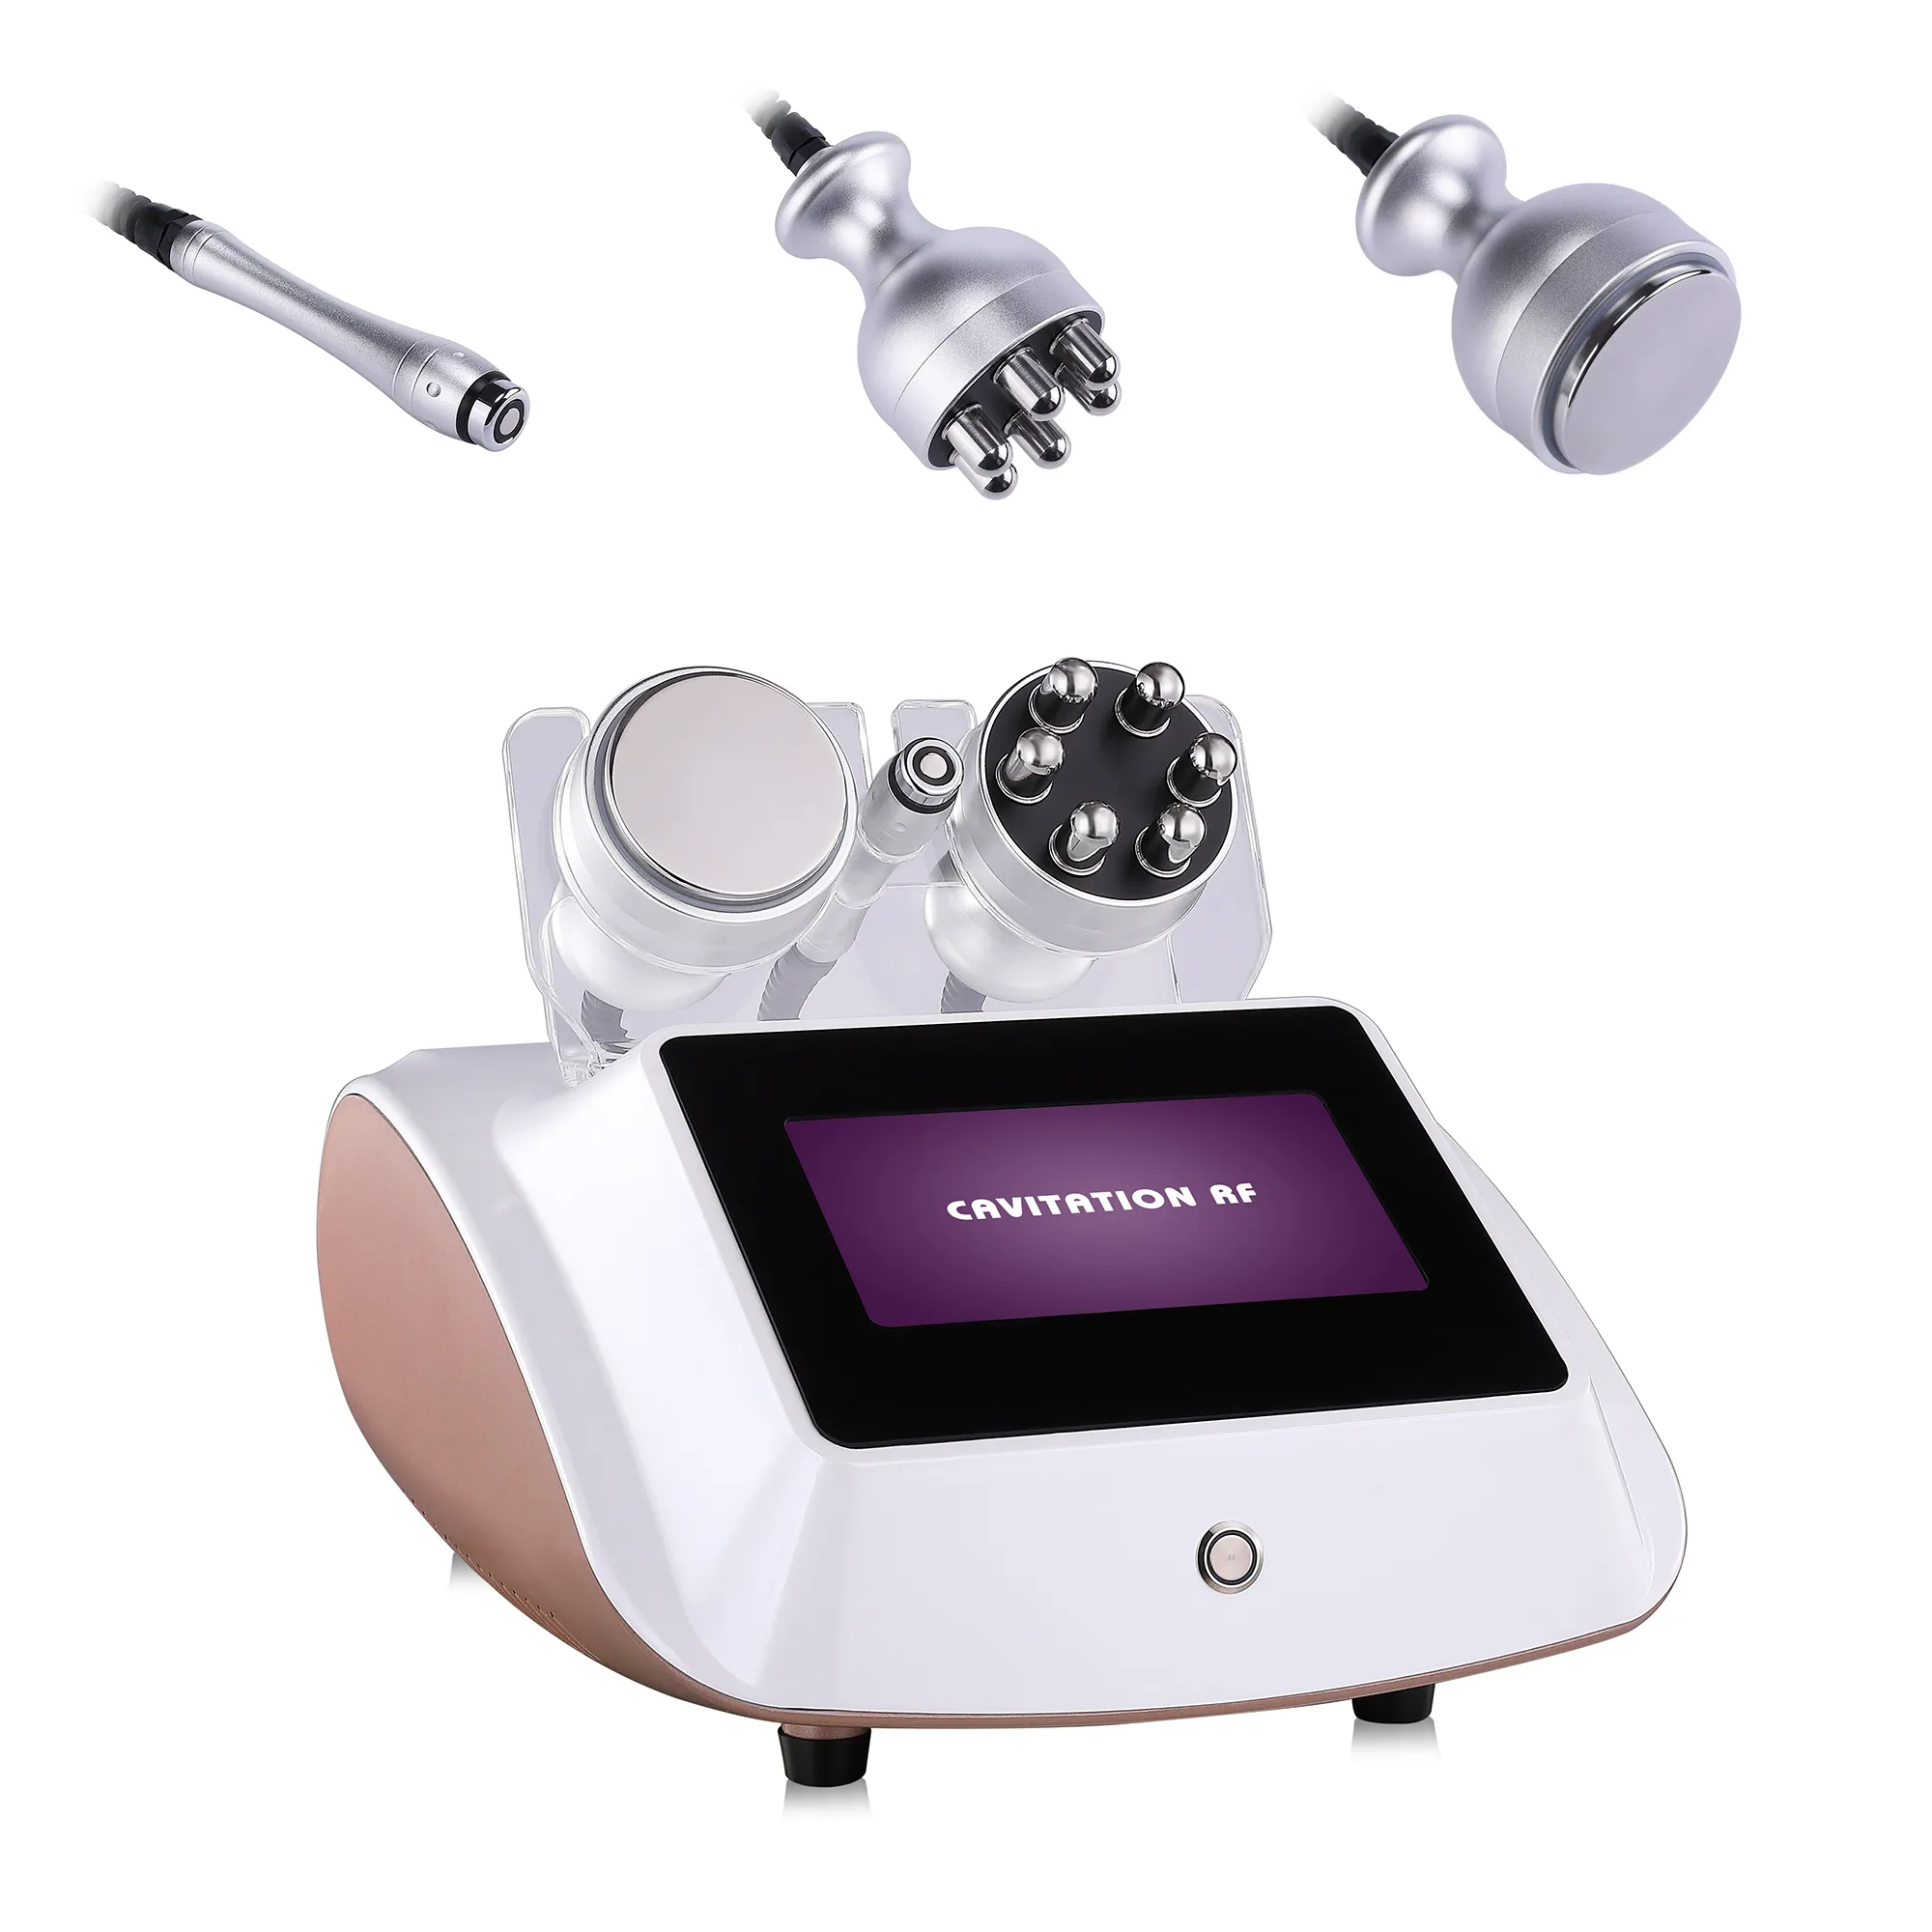 Newest 3 In 1 Fat Reduce Cavitation Device Potable Slimming System Machine For Body Slimming And Cellulite Removal